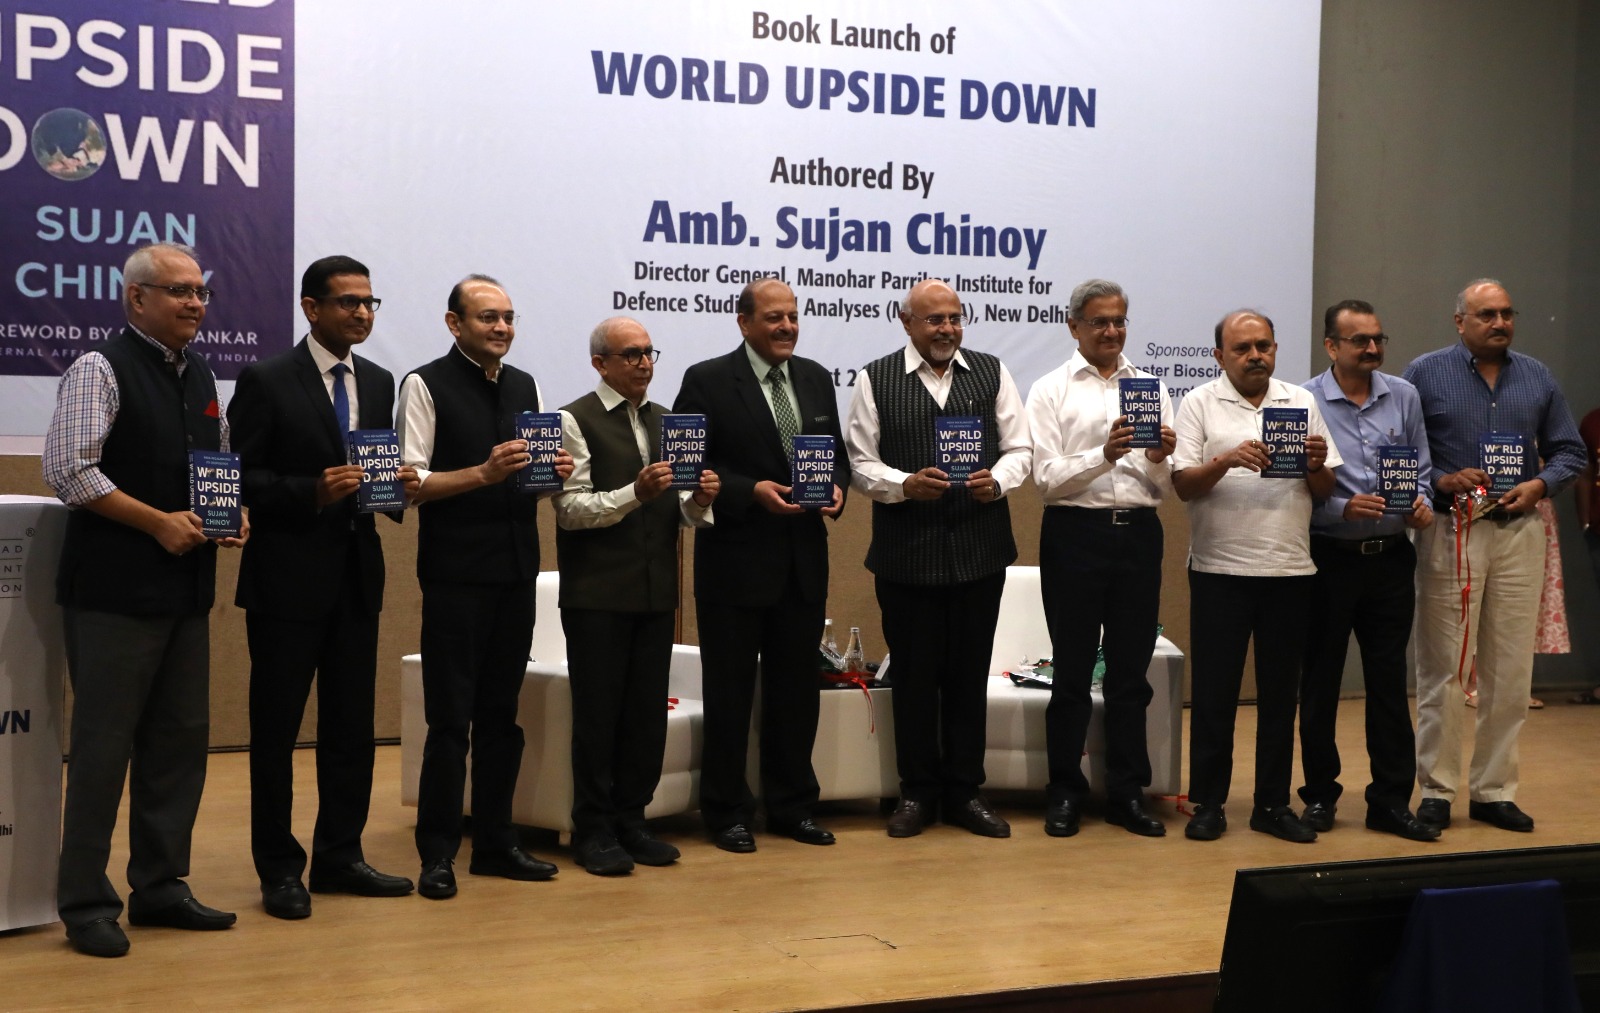 Book “World Upside Down,” by Ambassador Sujan Chinoy launched at AMA